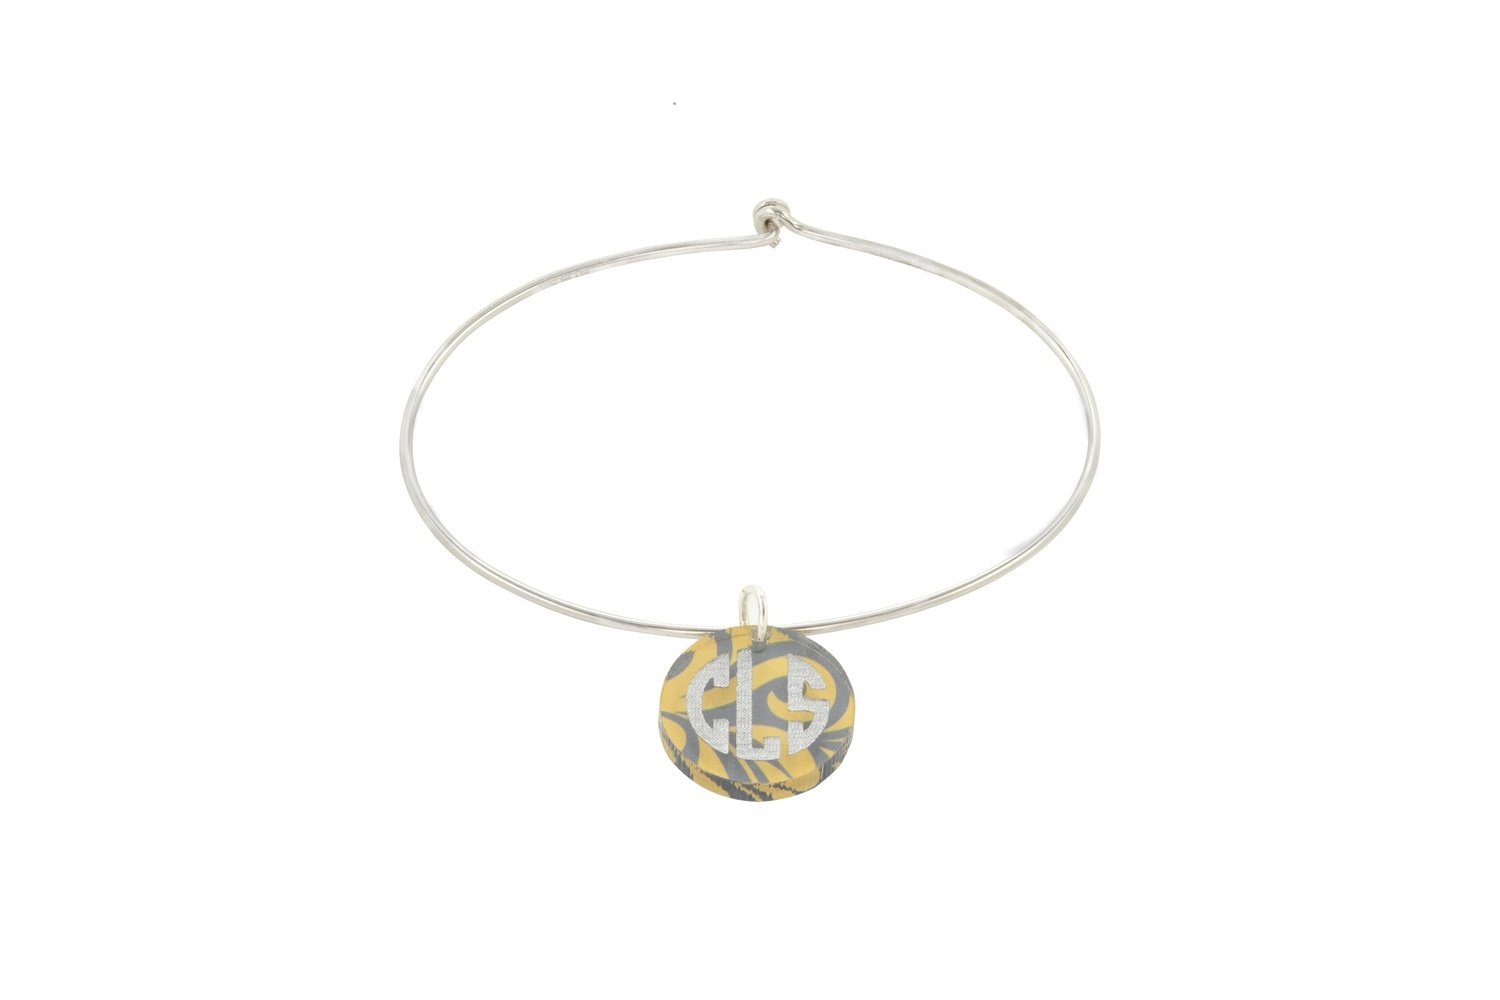 Traditional Monogram Charm with Sterling Silver Bangle Bracelet